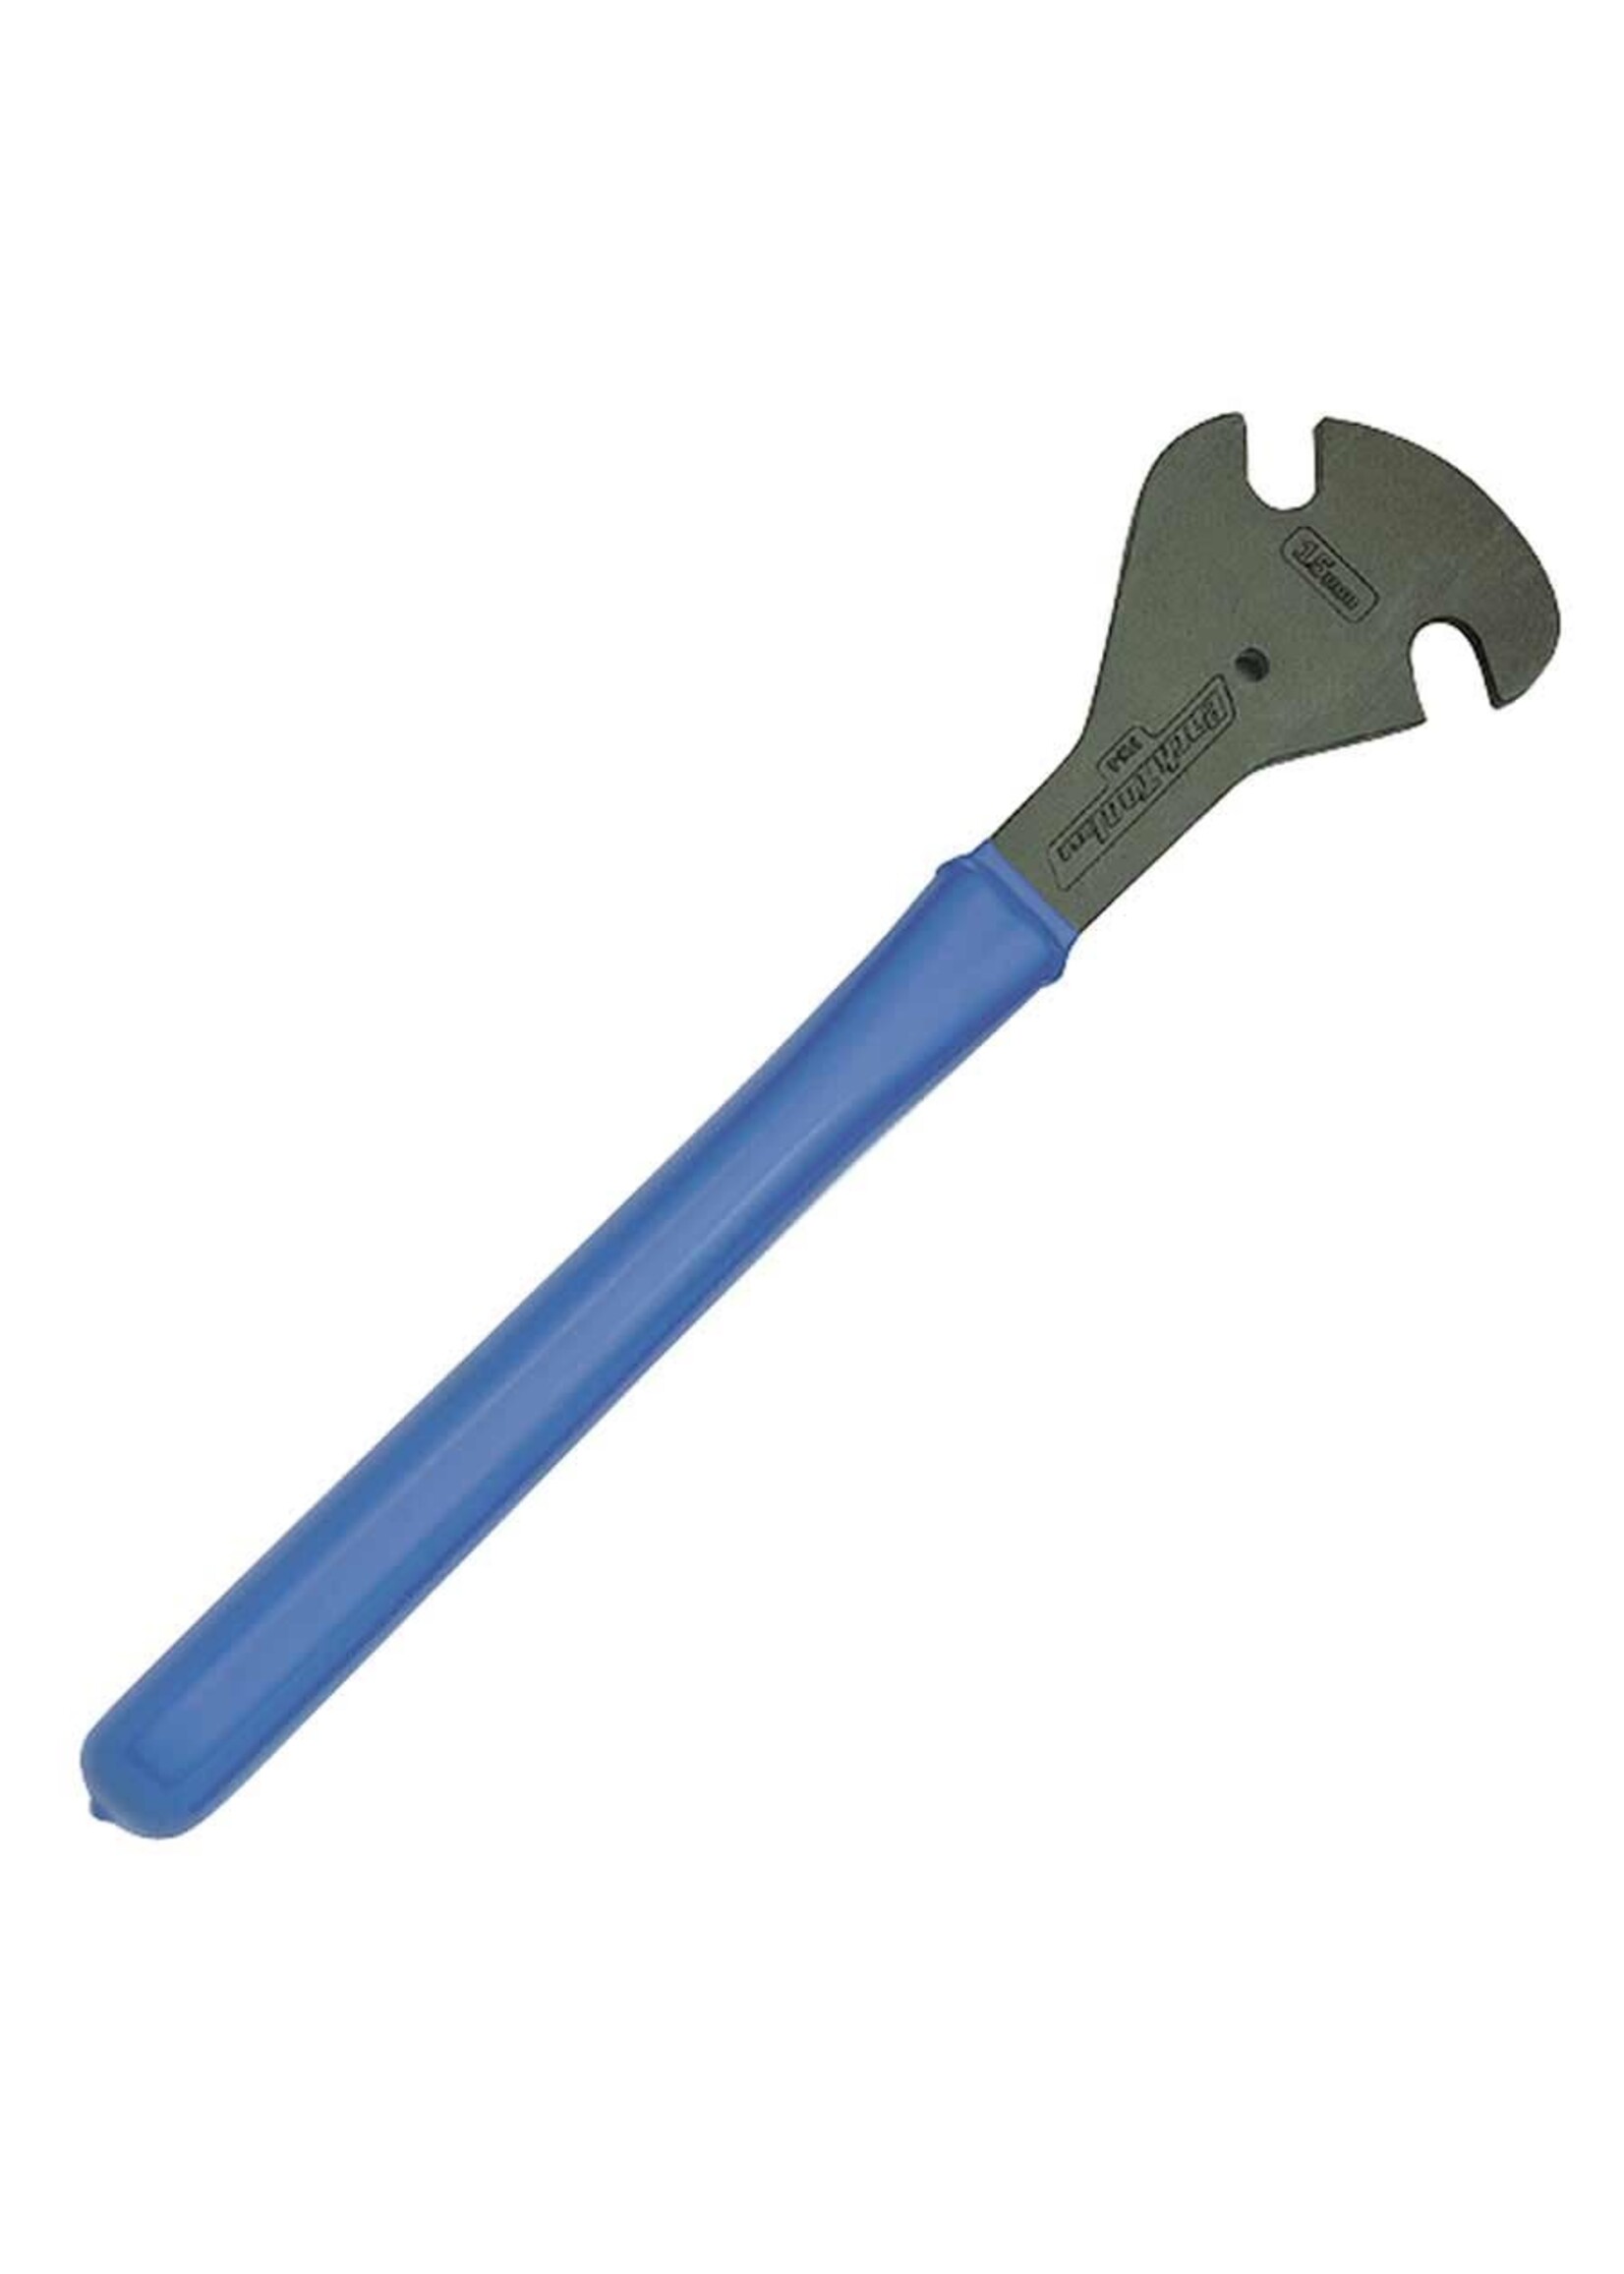 Park Tool PW-4 Professional Predal Wrench Park Tool